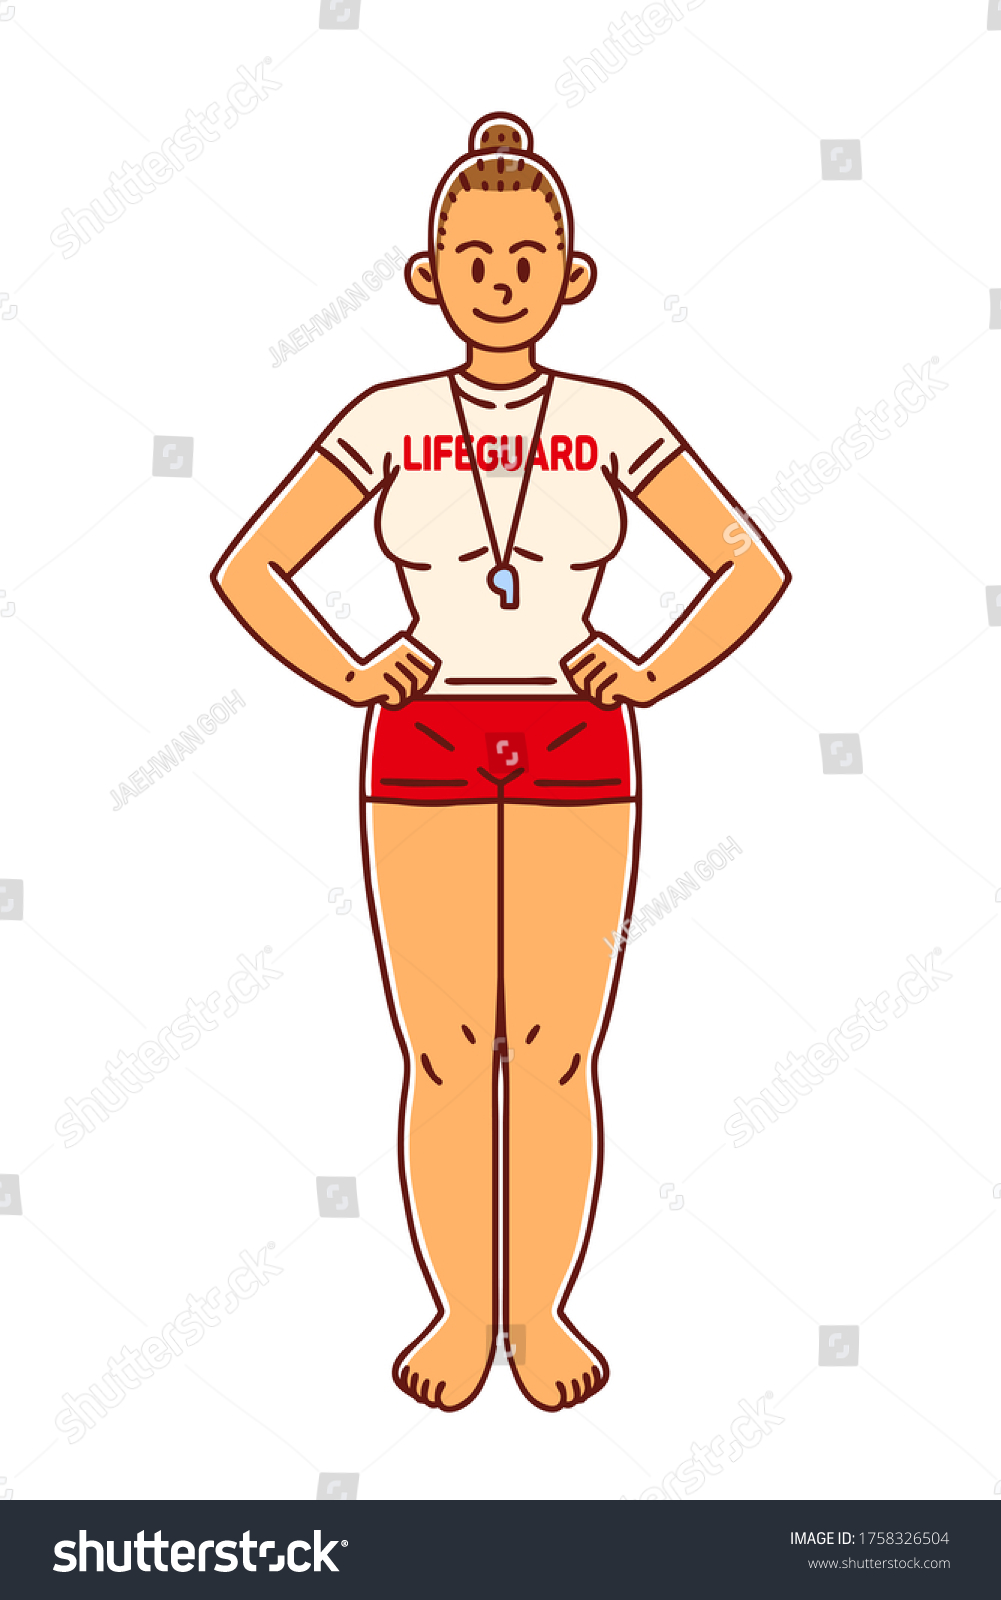 SVG of Woman lifeguard. Colored vector illustration. svg